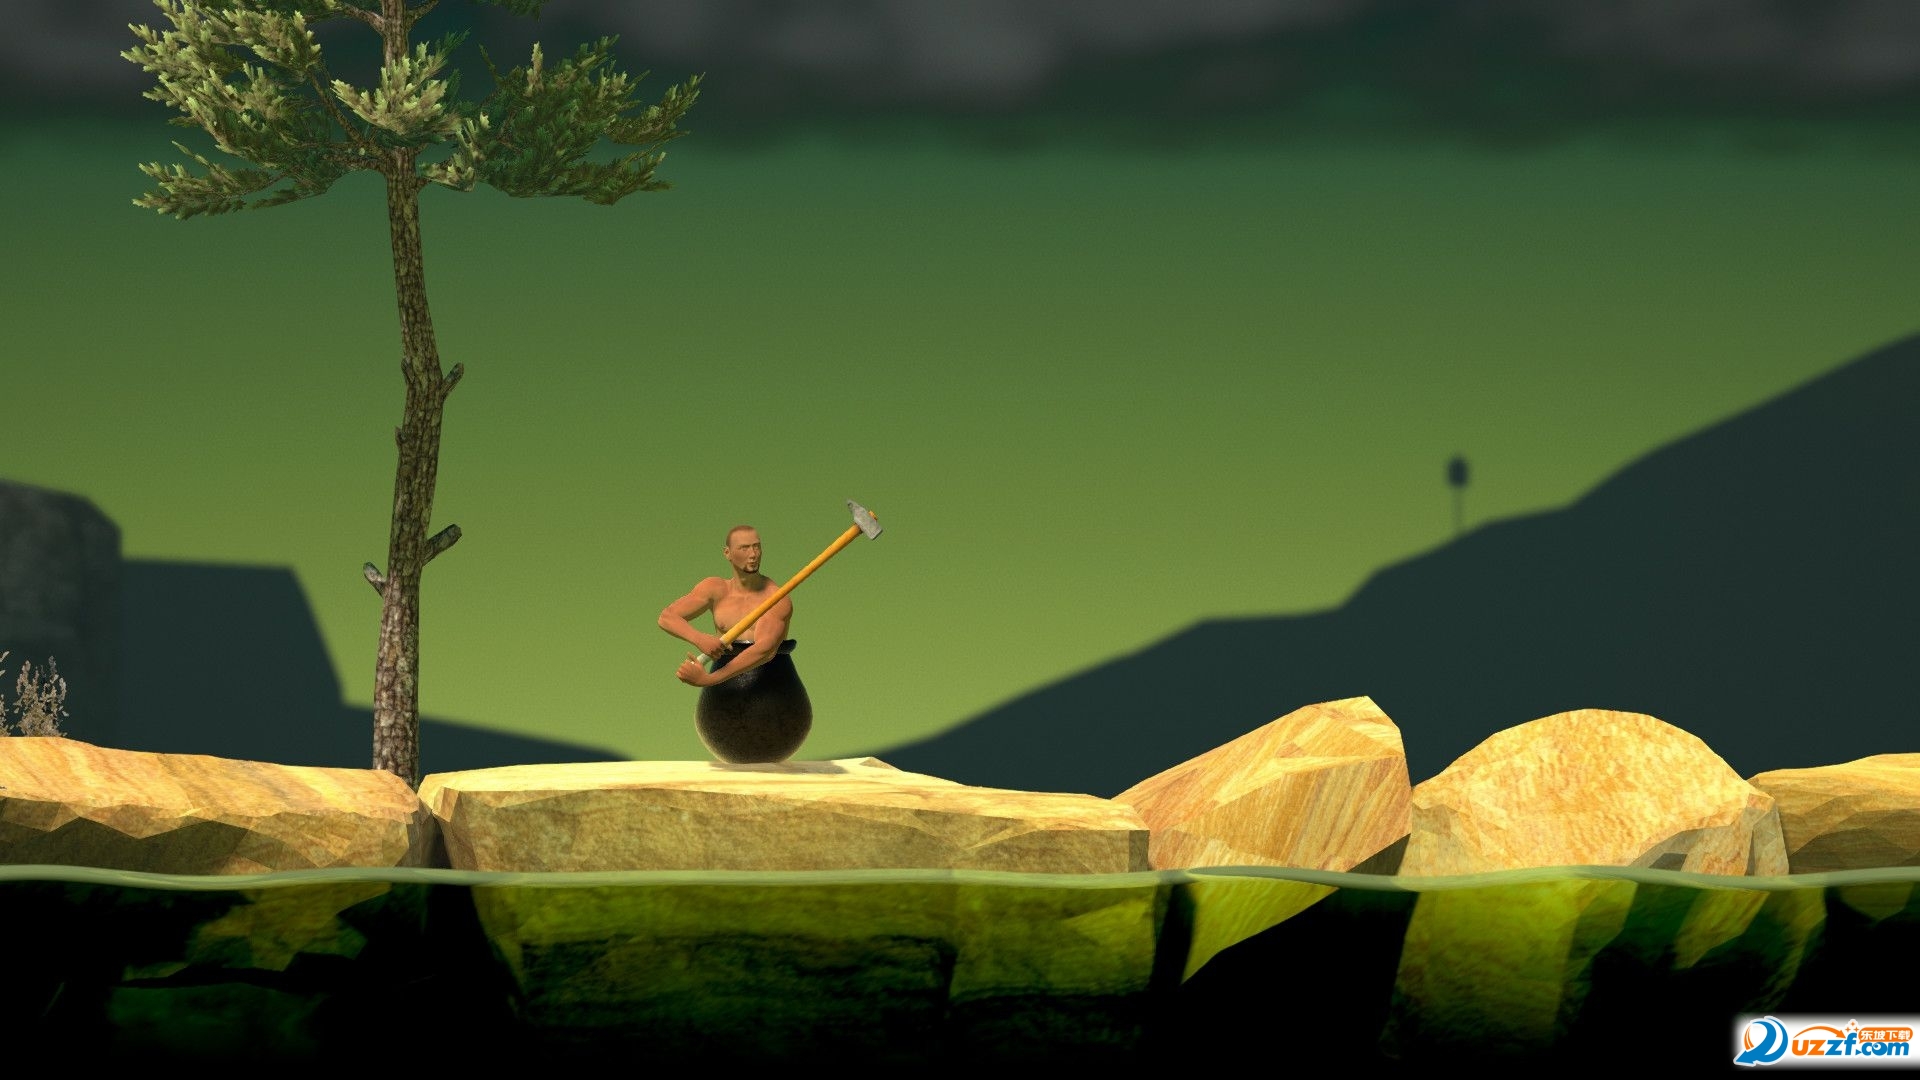 Getting Over ItϷ°ͼ0